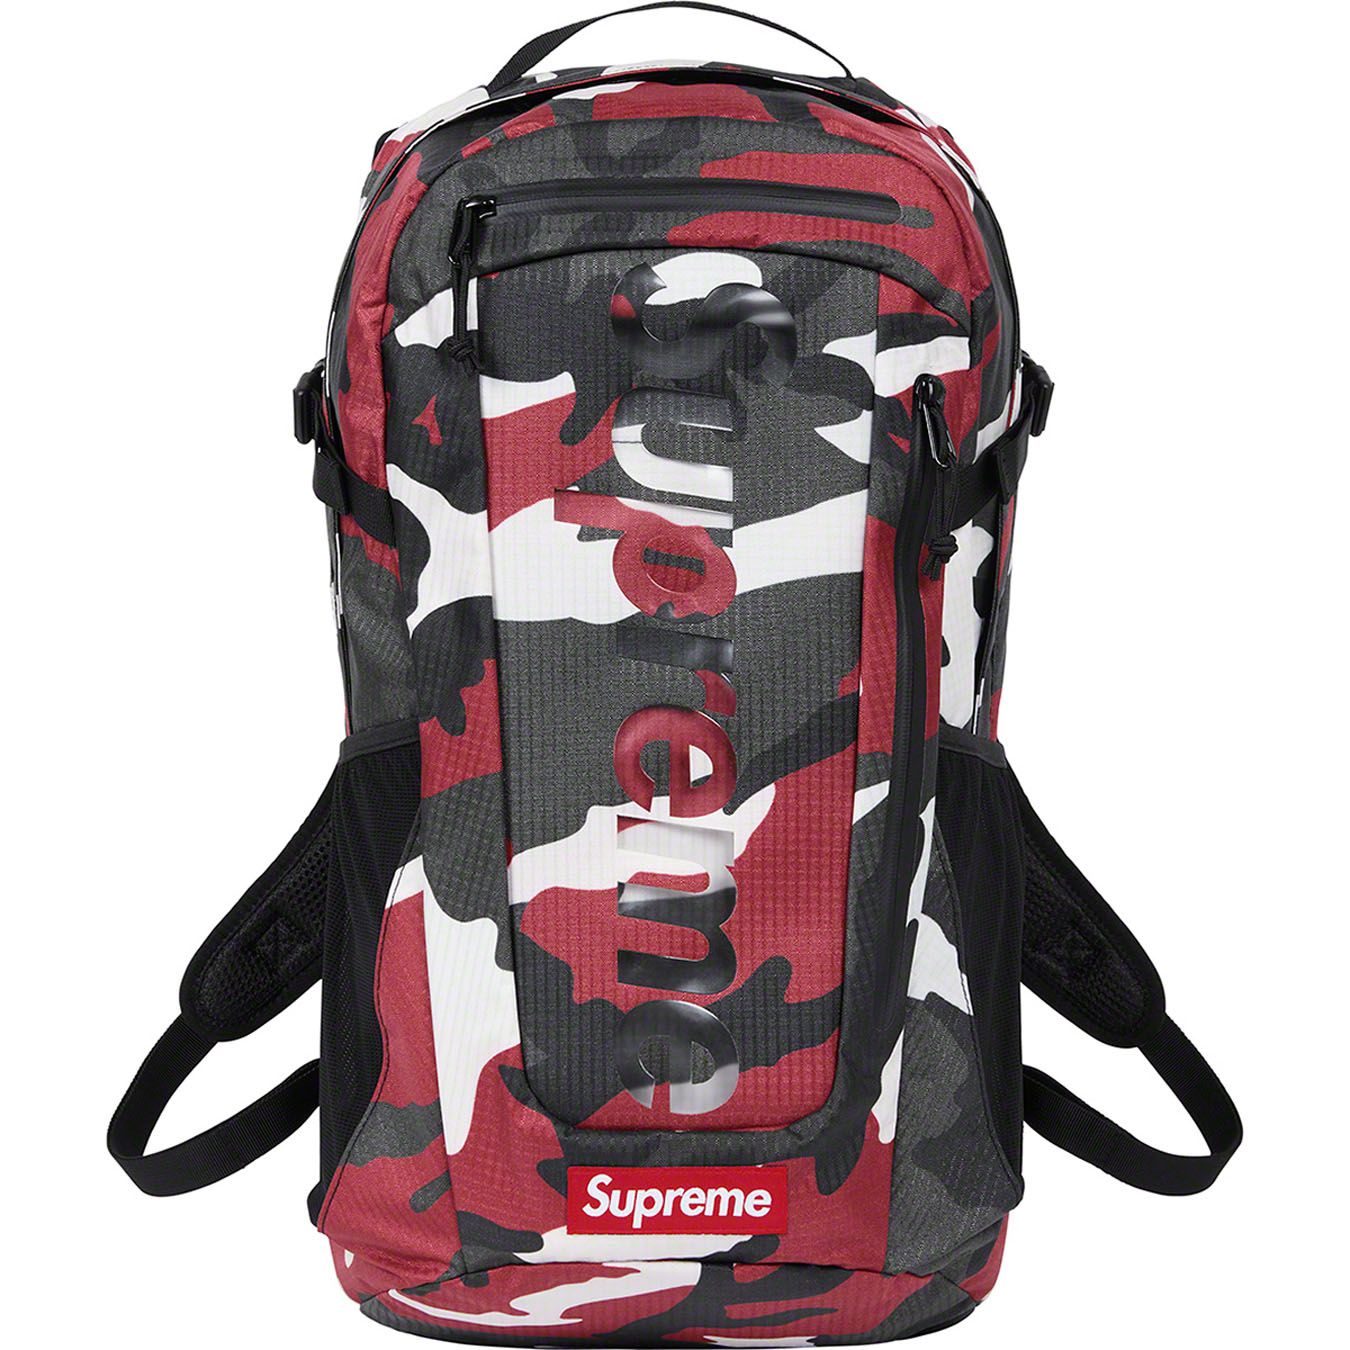  Supreme Backpack SS21 - Red Camo 